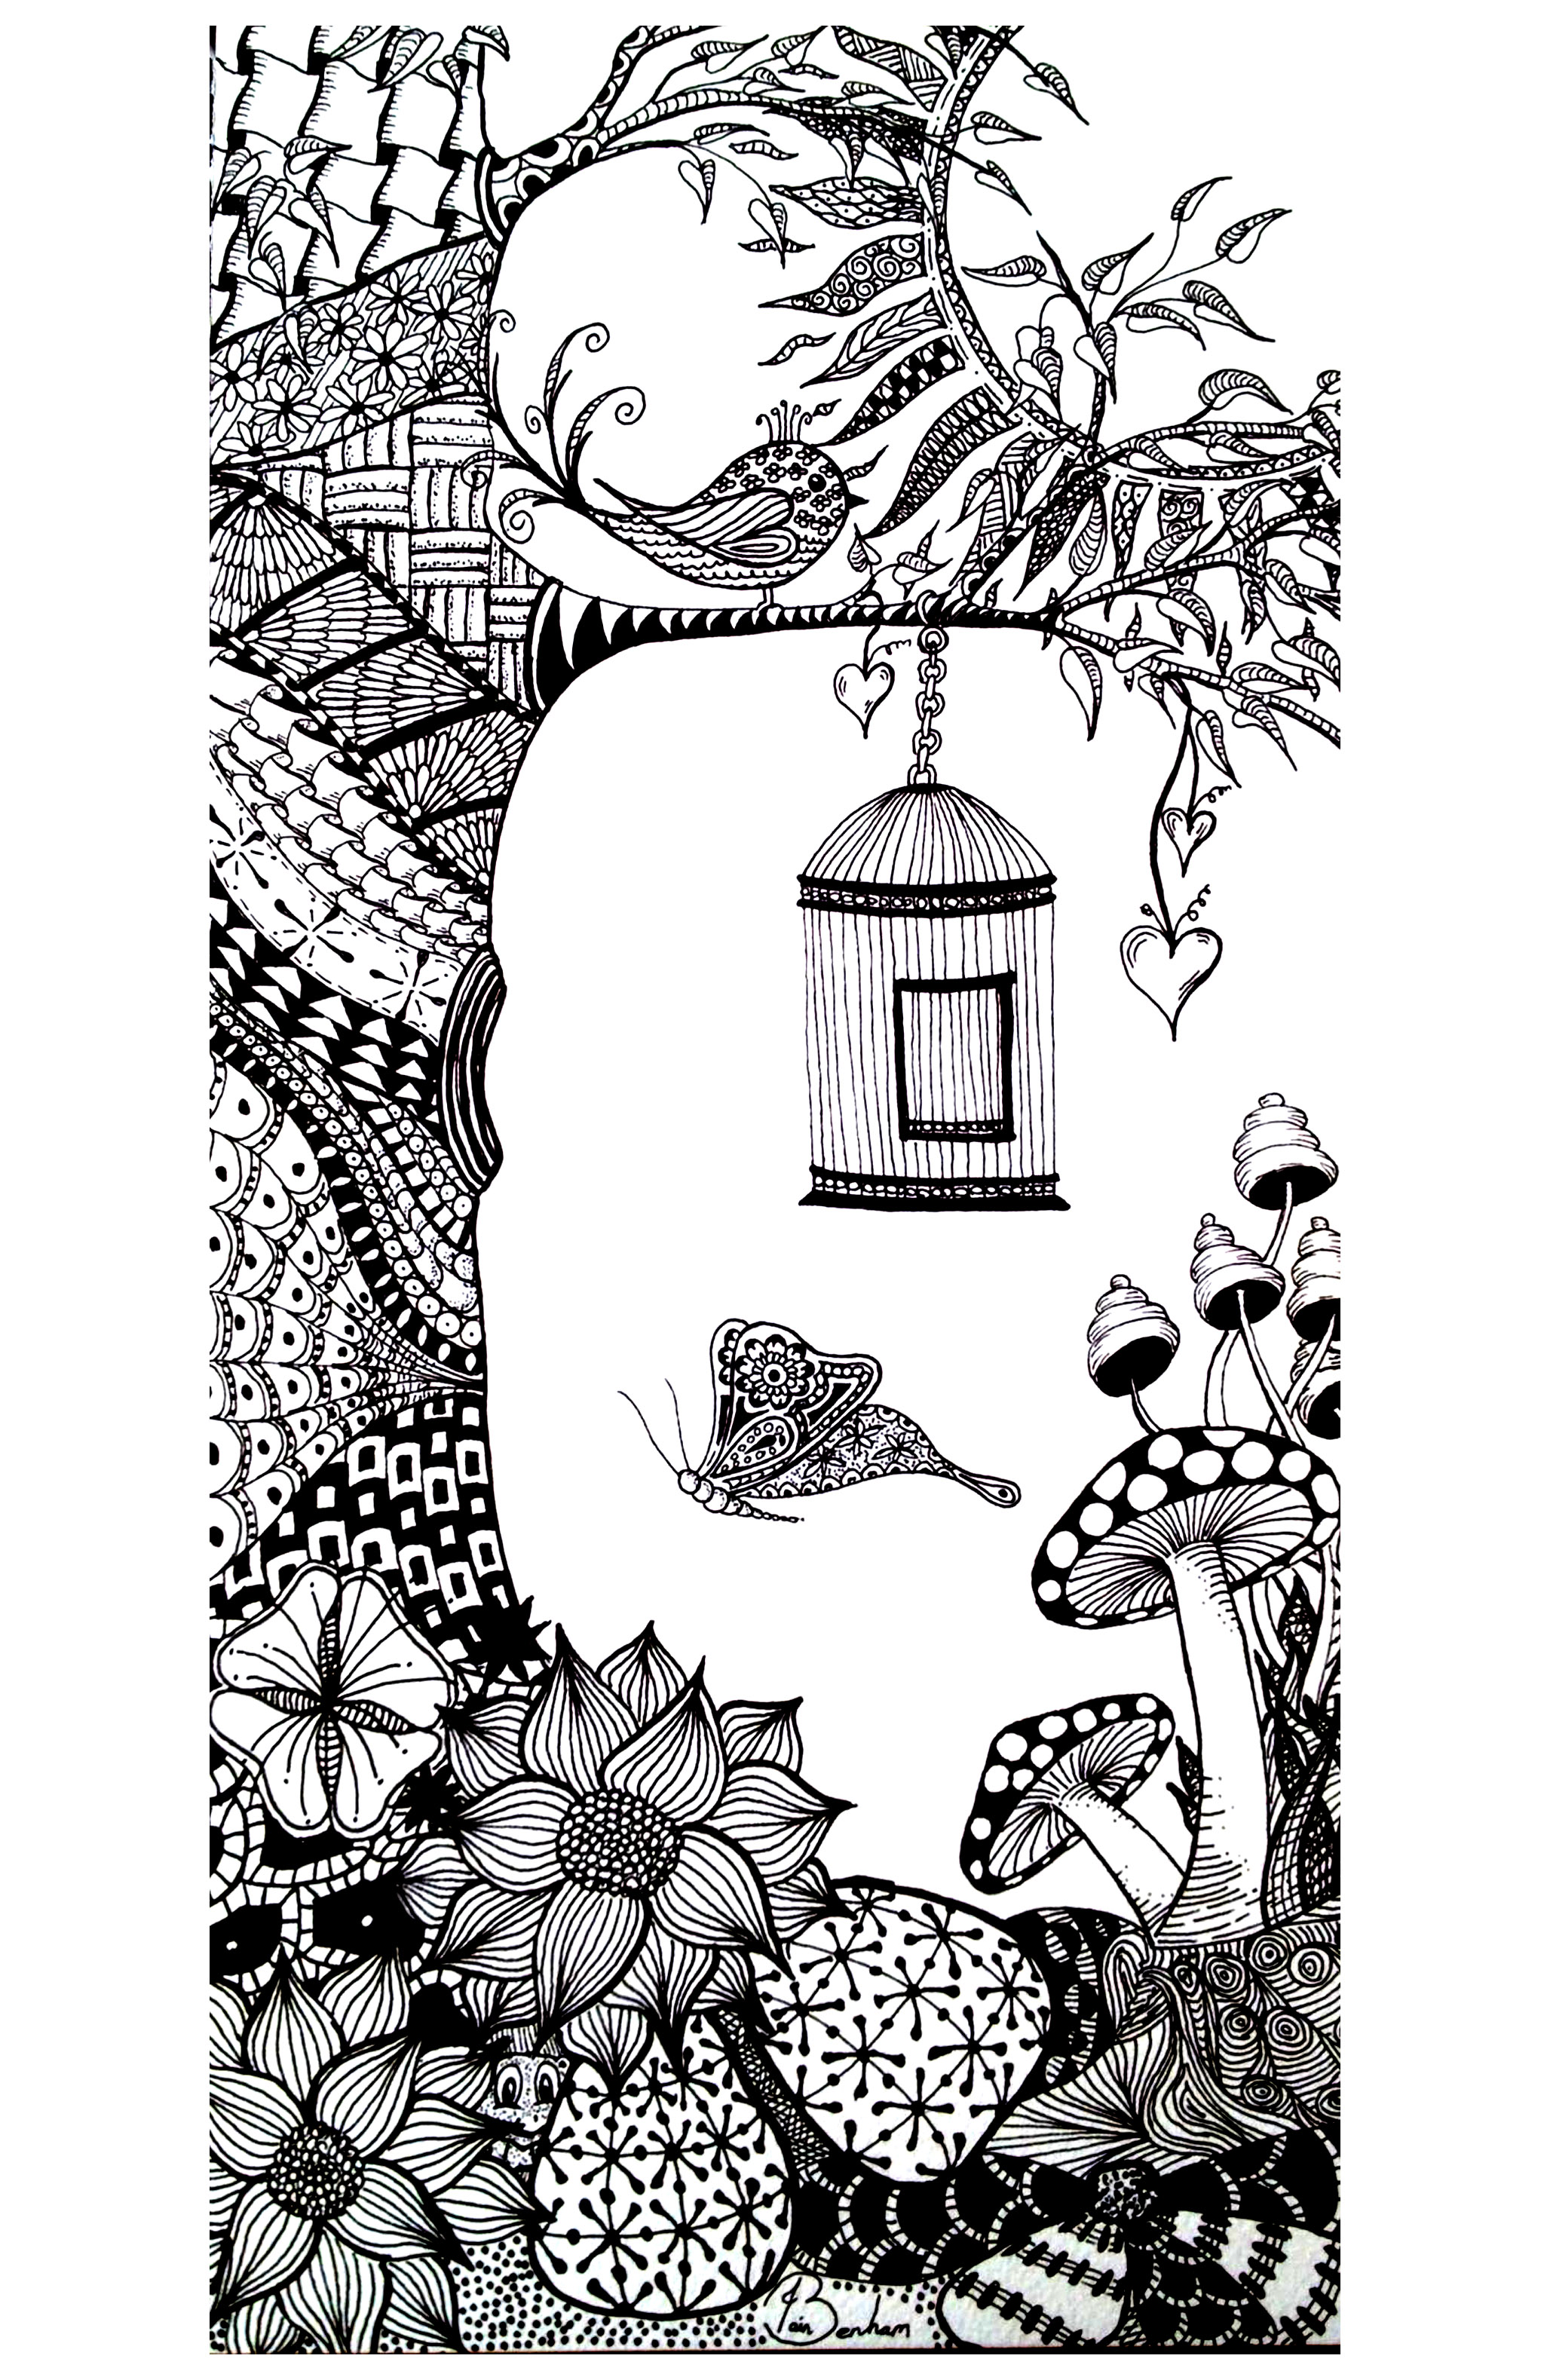 Drawing to color with a tree, a bird, butterflies ... Colorful Zentangle patterns